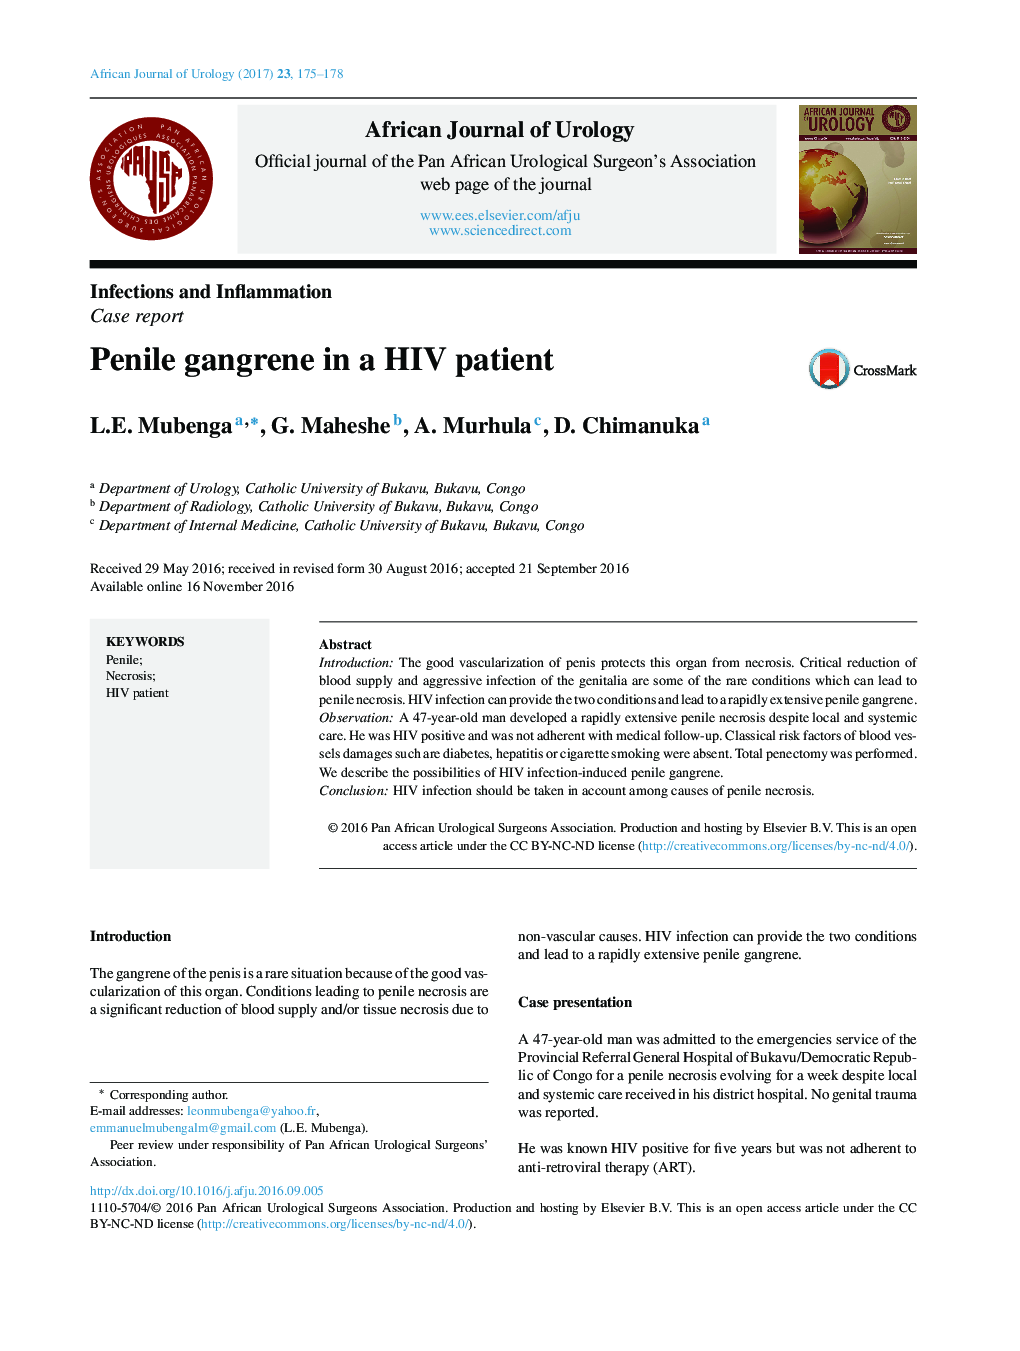 Infections and InflammationCase reportPenile gangrene in a HIV patient